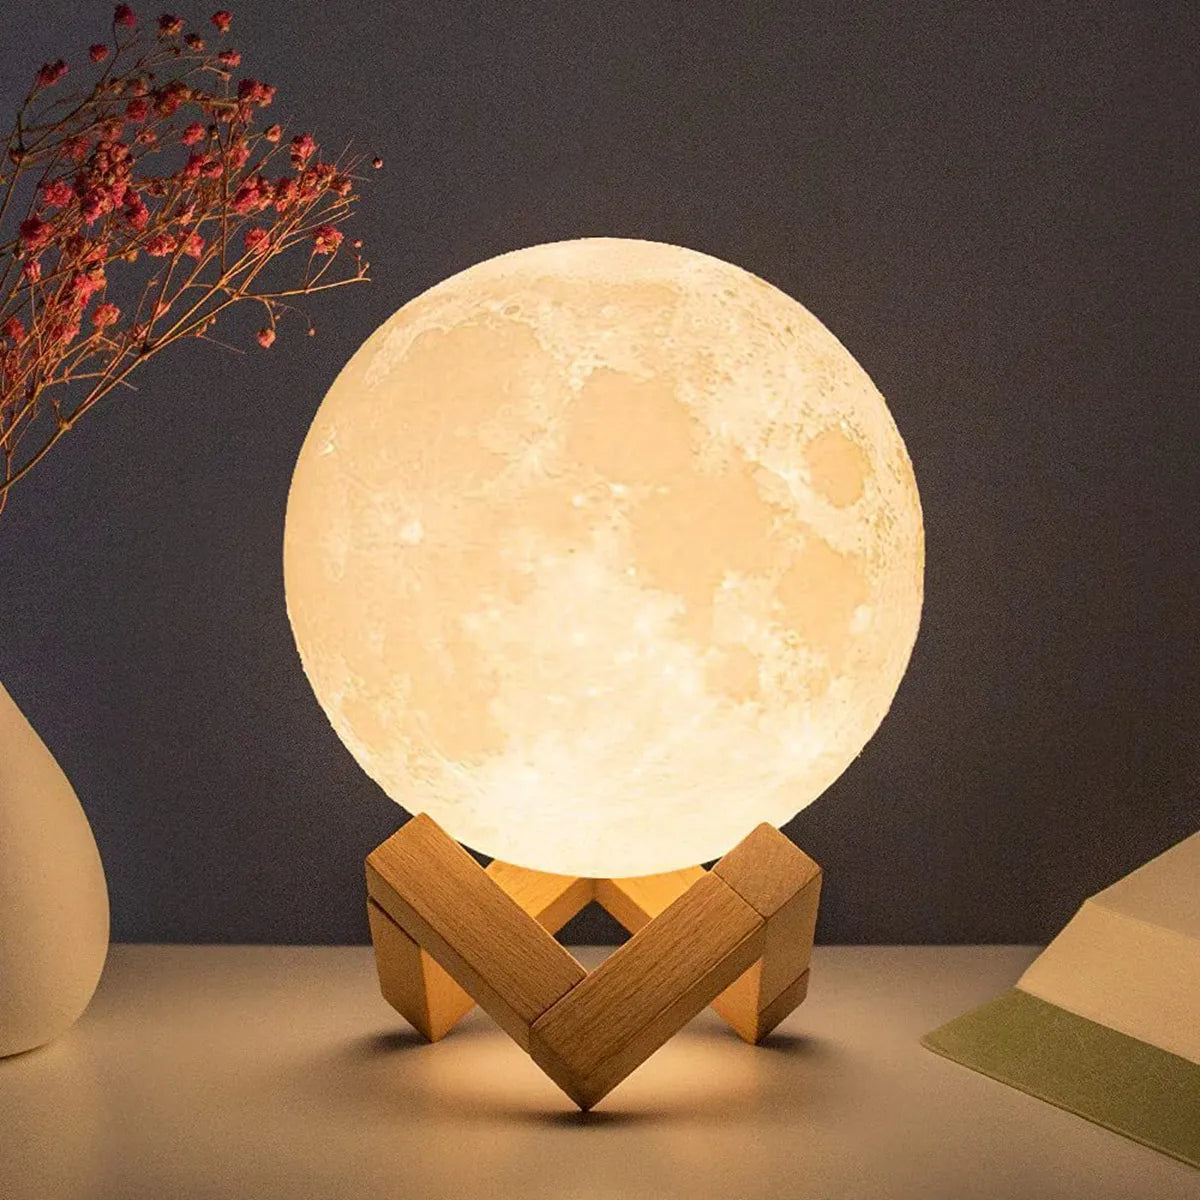 Aukey Touch Control led lamp Moon Lamp LED Night Light Battery Powered With Stand Starry Lamp Bedroom Decor Night Lights Gift Moon Lamp